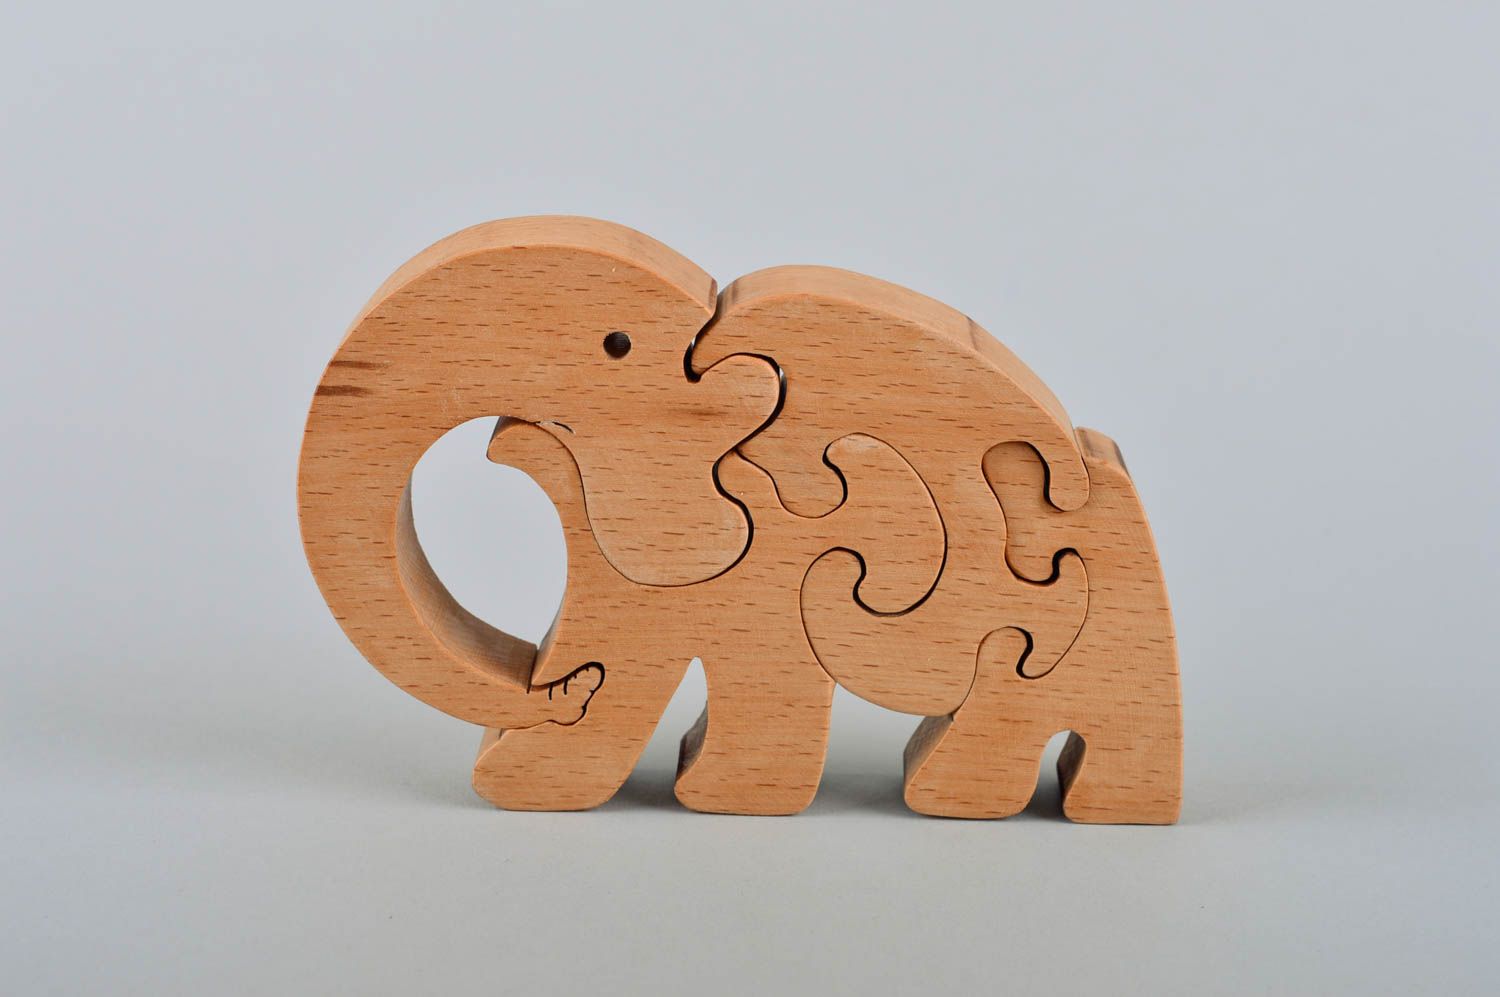 Handmade puzzle wooden puzzle unusual toy for children gift ideas decor ideas photo 2